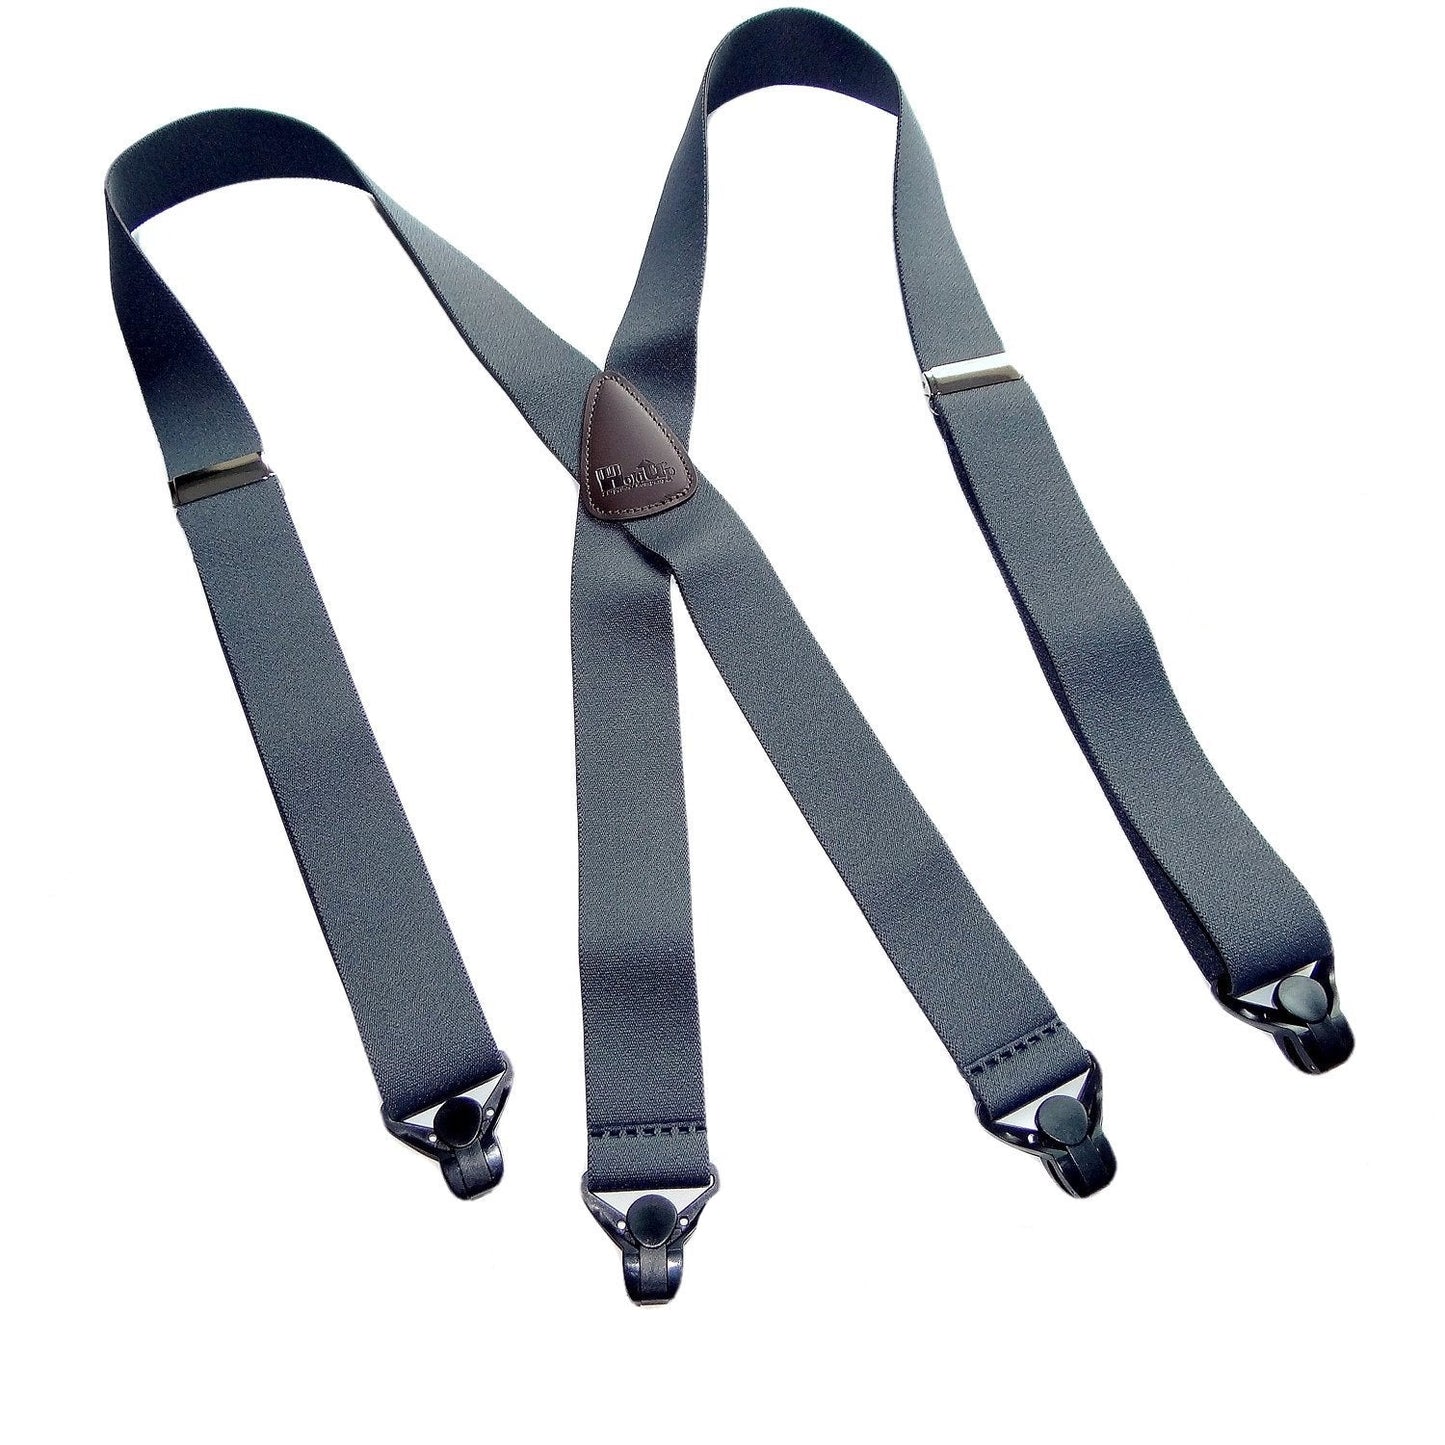 Holdup Brand Charcoal Grey X-back Classic Series Suspenders With Black Gripper Clasps